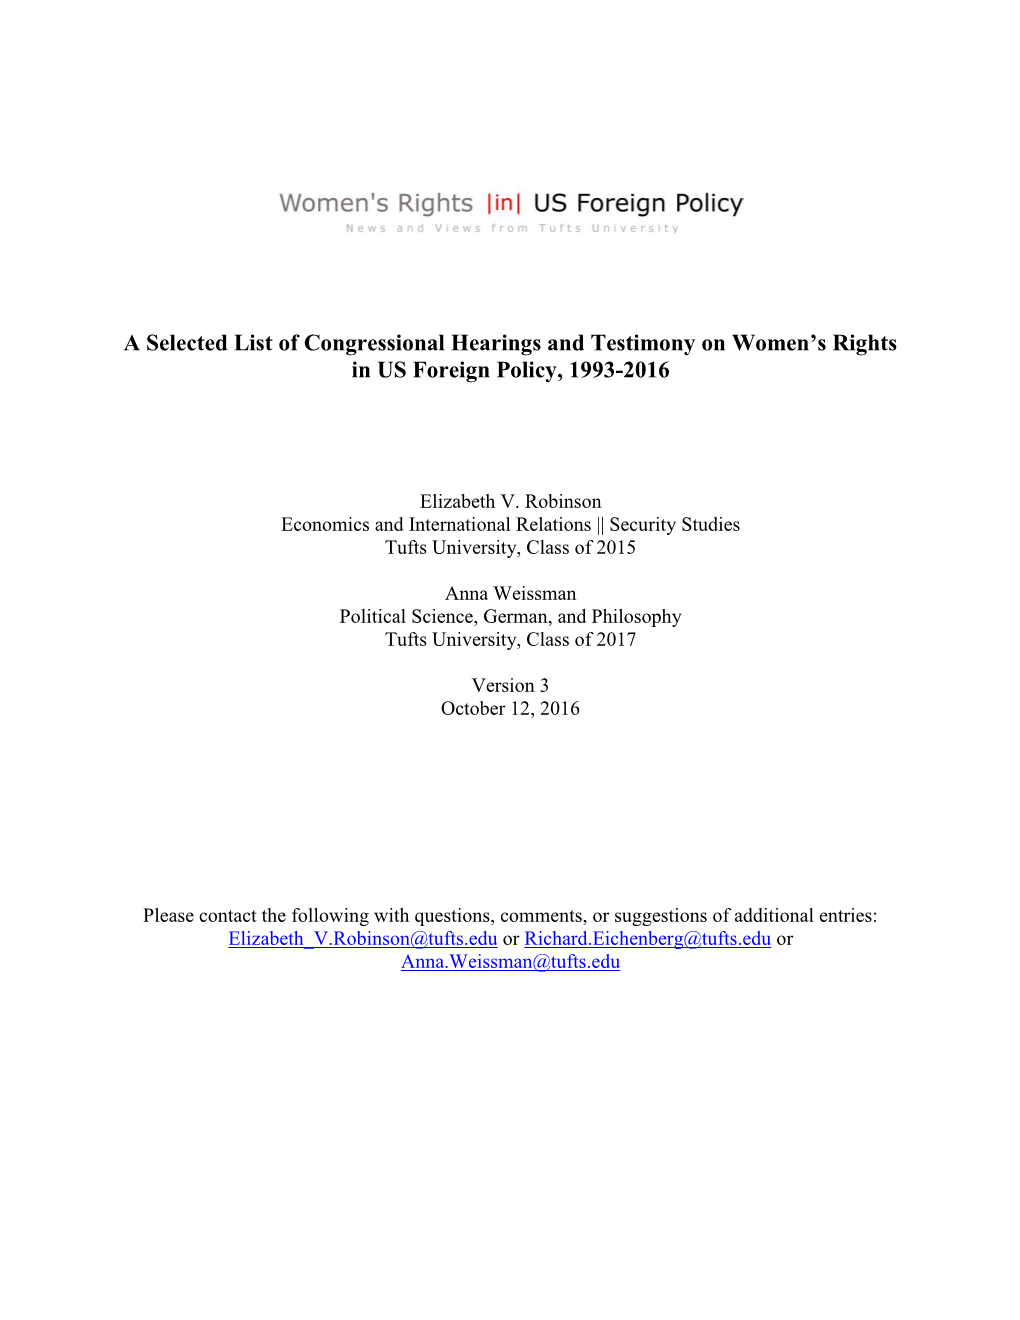 A Selected List of Congressional Hearings and Testimony on Women’S Rights in US Foreign Policy, 1993-2016